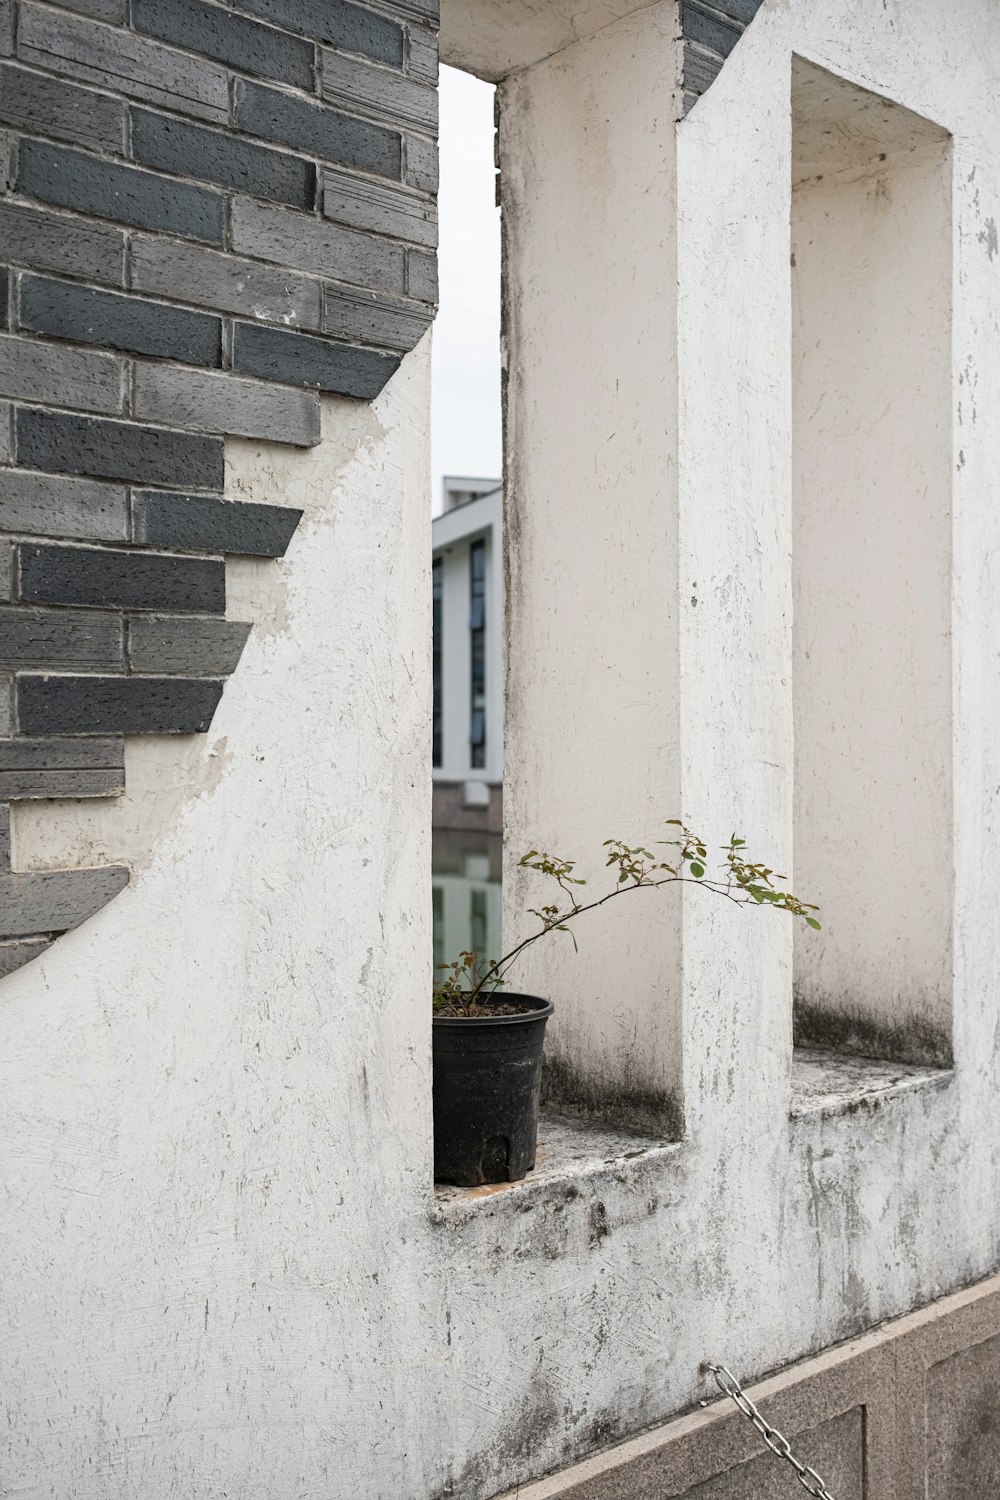 a potted plant sitting on the ledge of a building